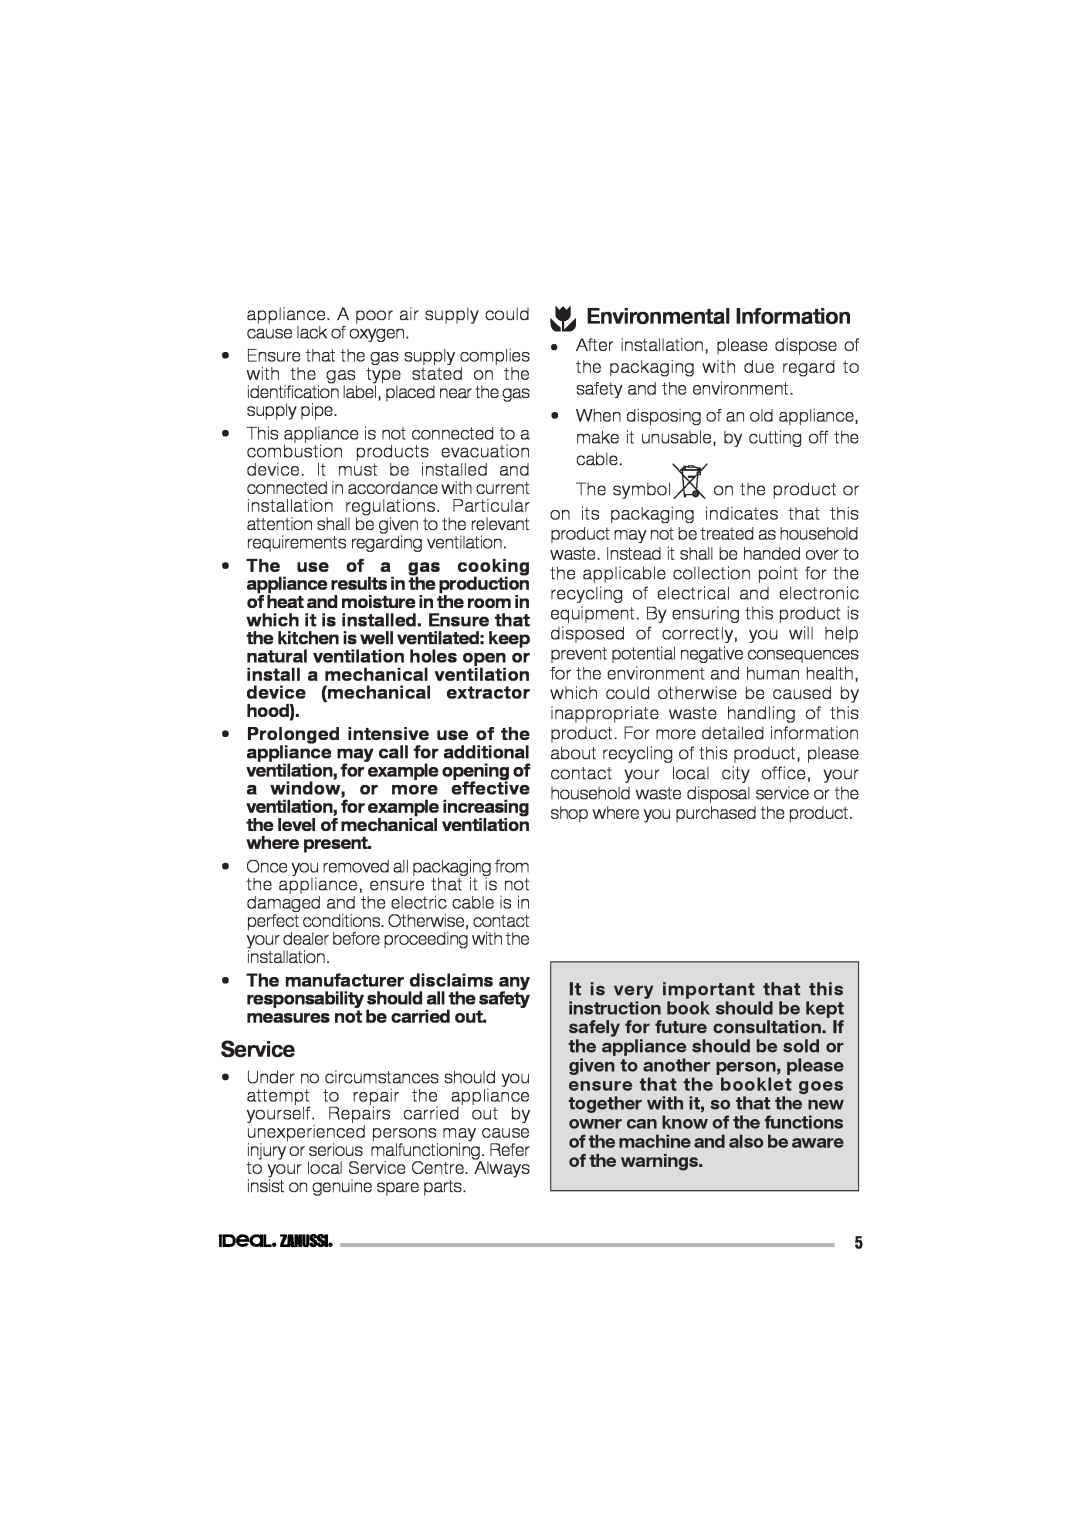 IDEAL INDUSTRIES IZGS 68 ICTX manual Service, Environmental Information 